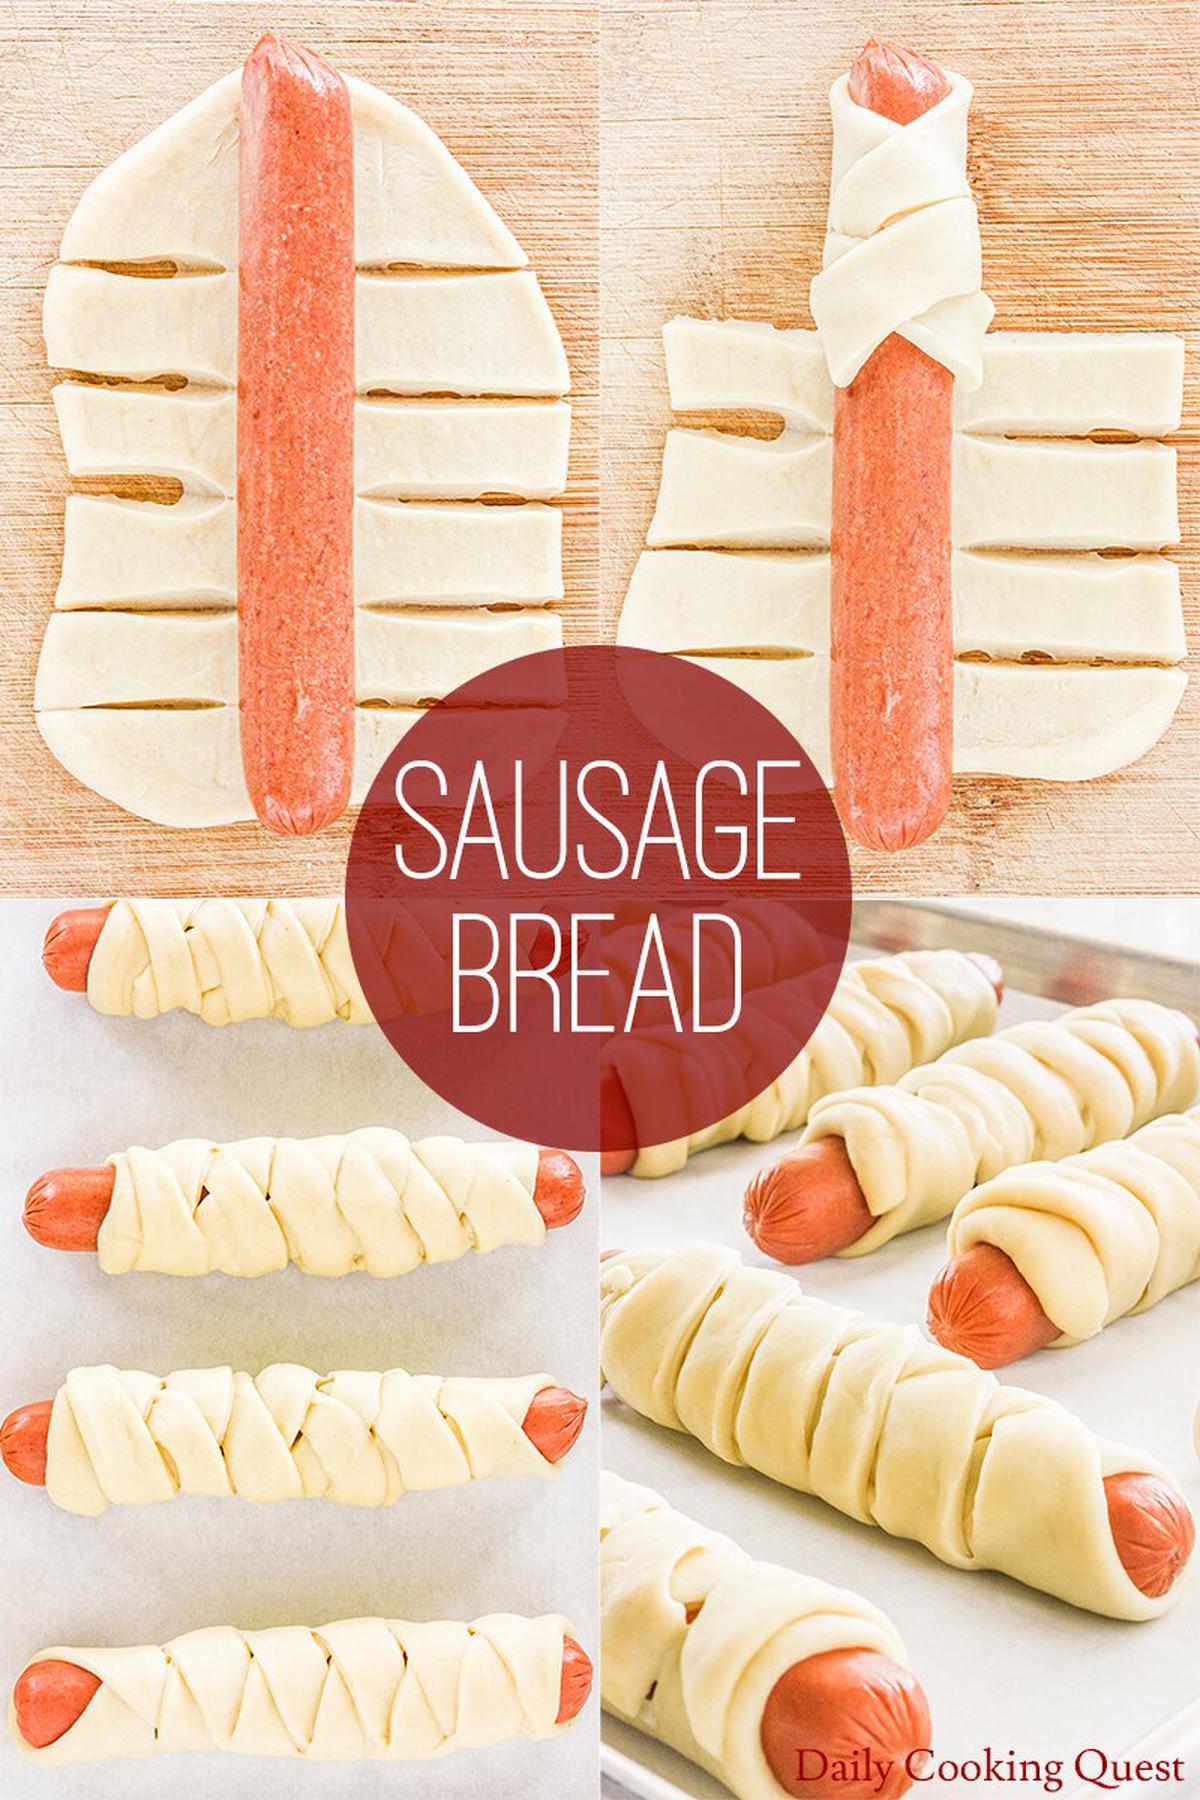 Step-By-Step Guide to Assemble Sausage Bread.